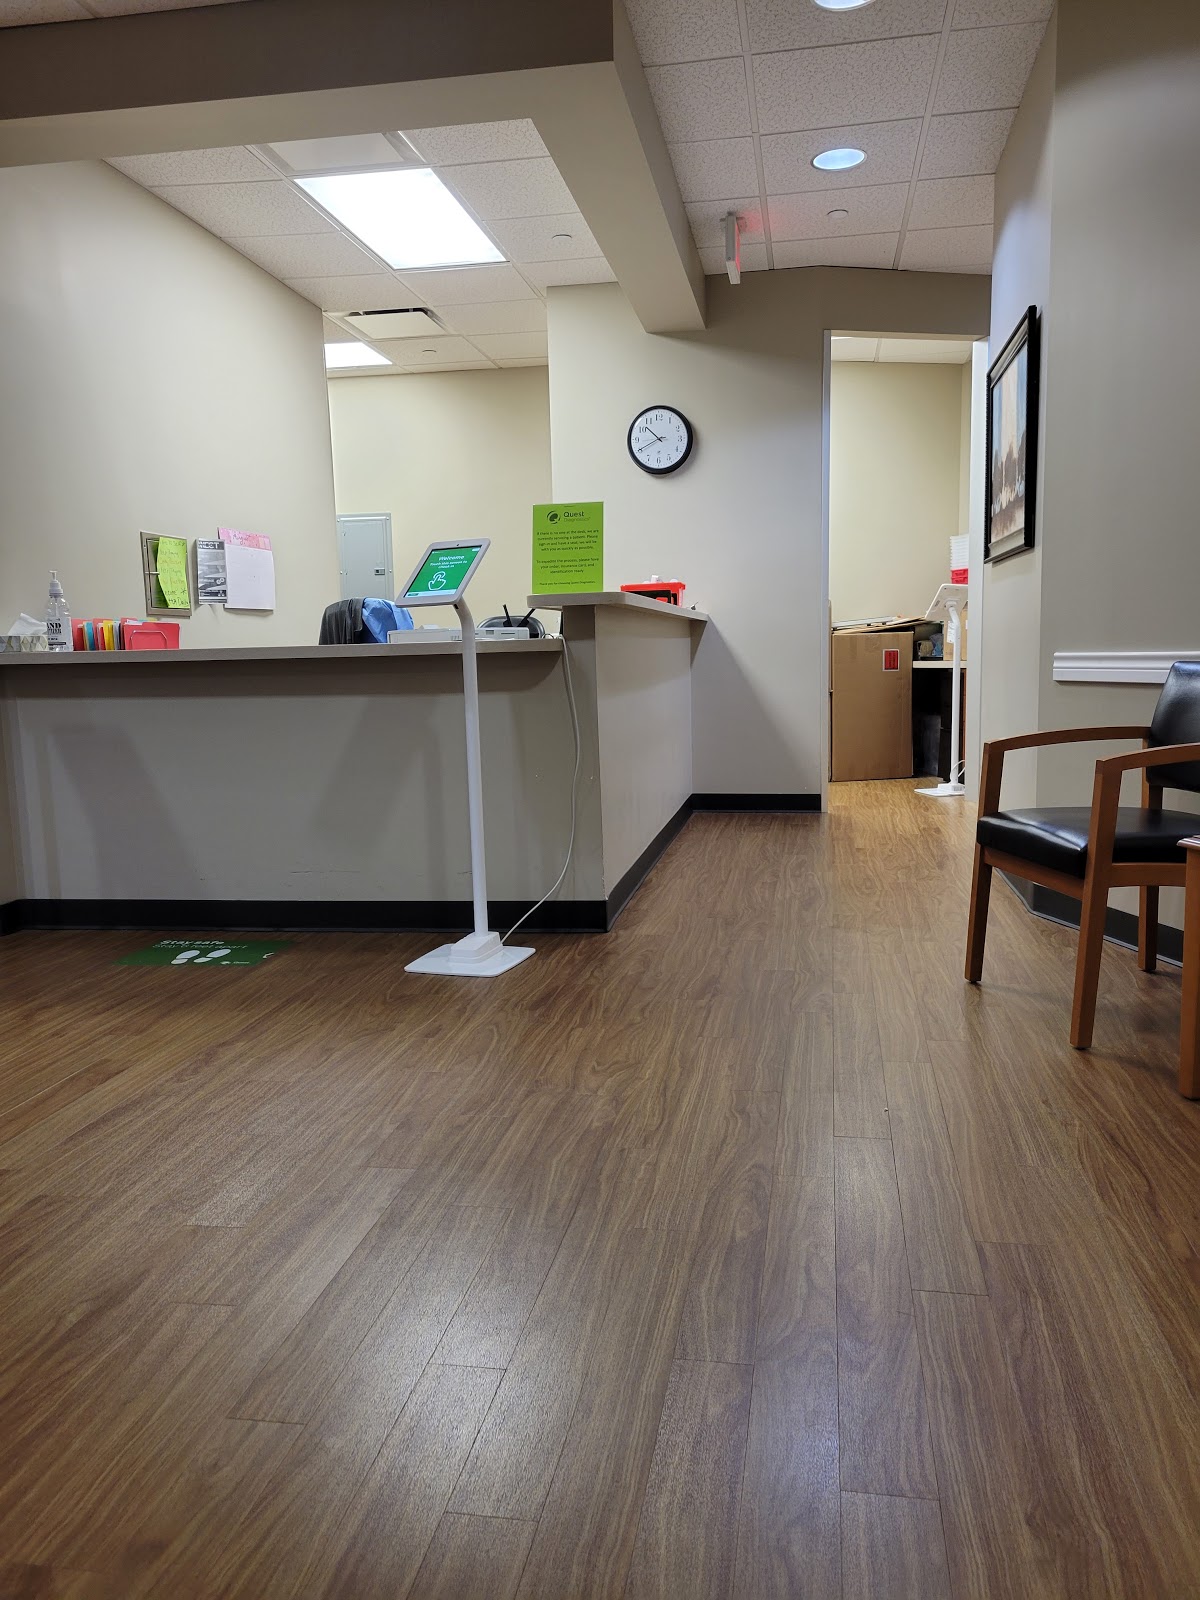 Photo of Quest Diagnostics The Woodlands COVID Testing at 9305 Pinecroft Dr Ste 103, The Woodlands, TX 77380, USA